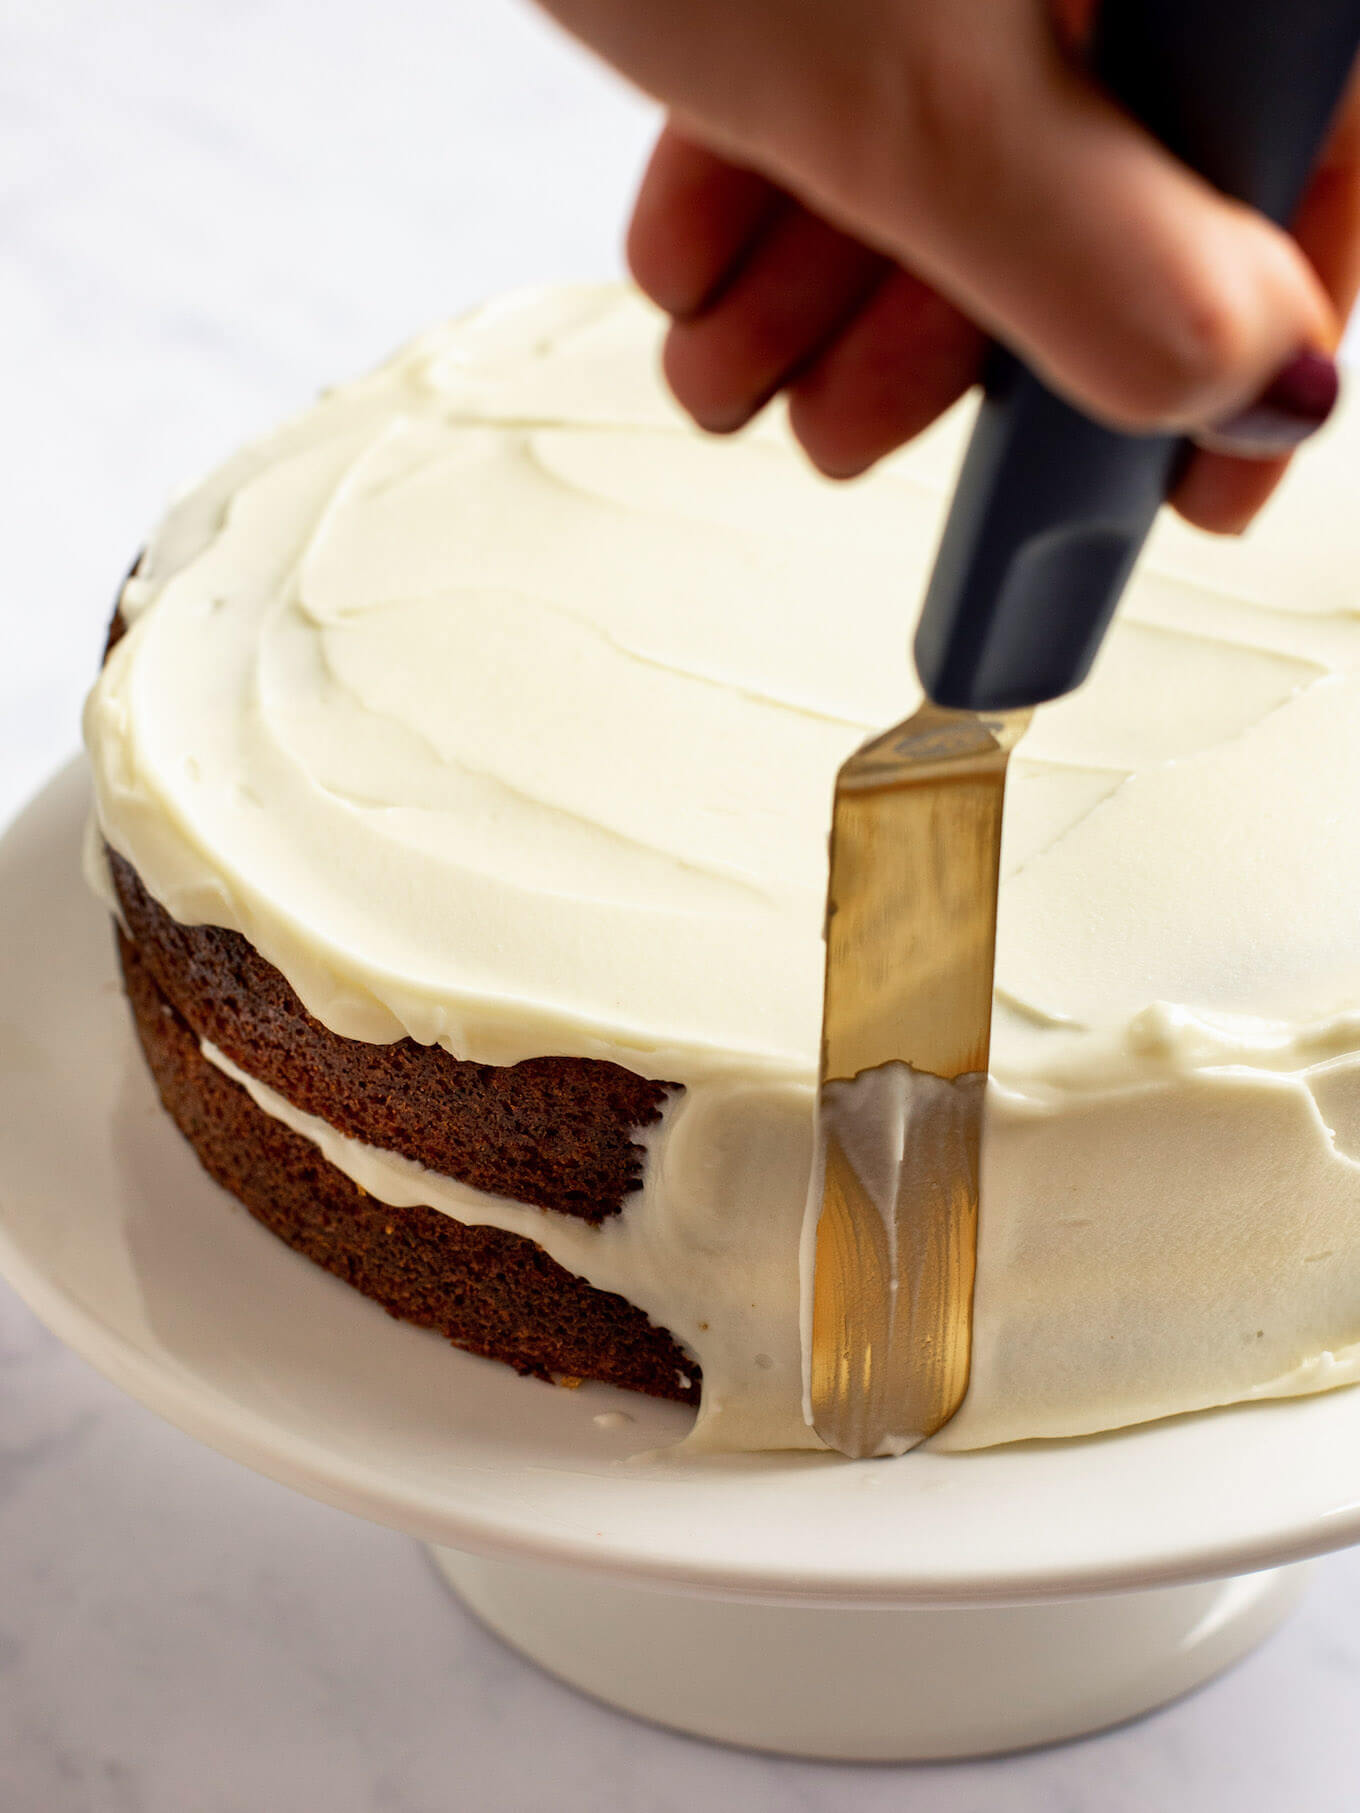 A carrot cake being frosted on the top and sides with cream cheese frosting.